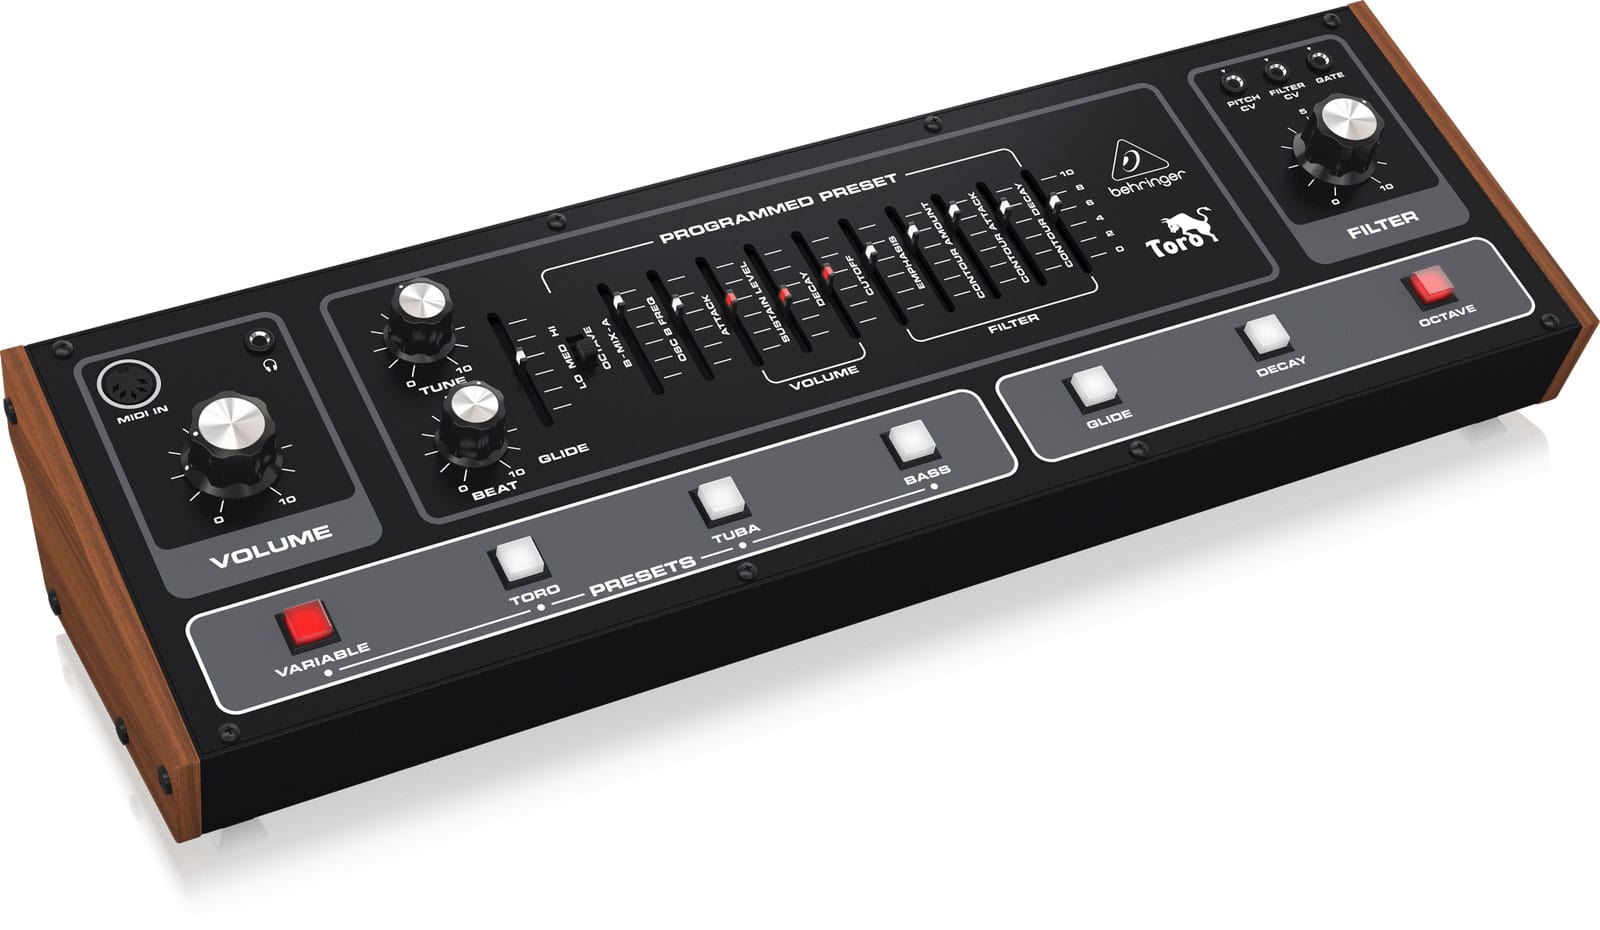 Behringer's Toro is a $199 recreation of the Moog Taurus Revision 1 bass  synth